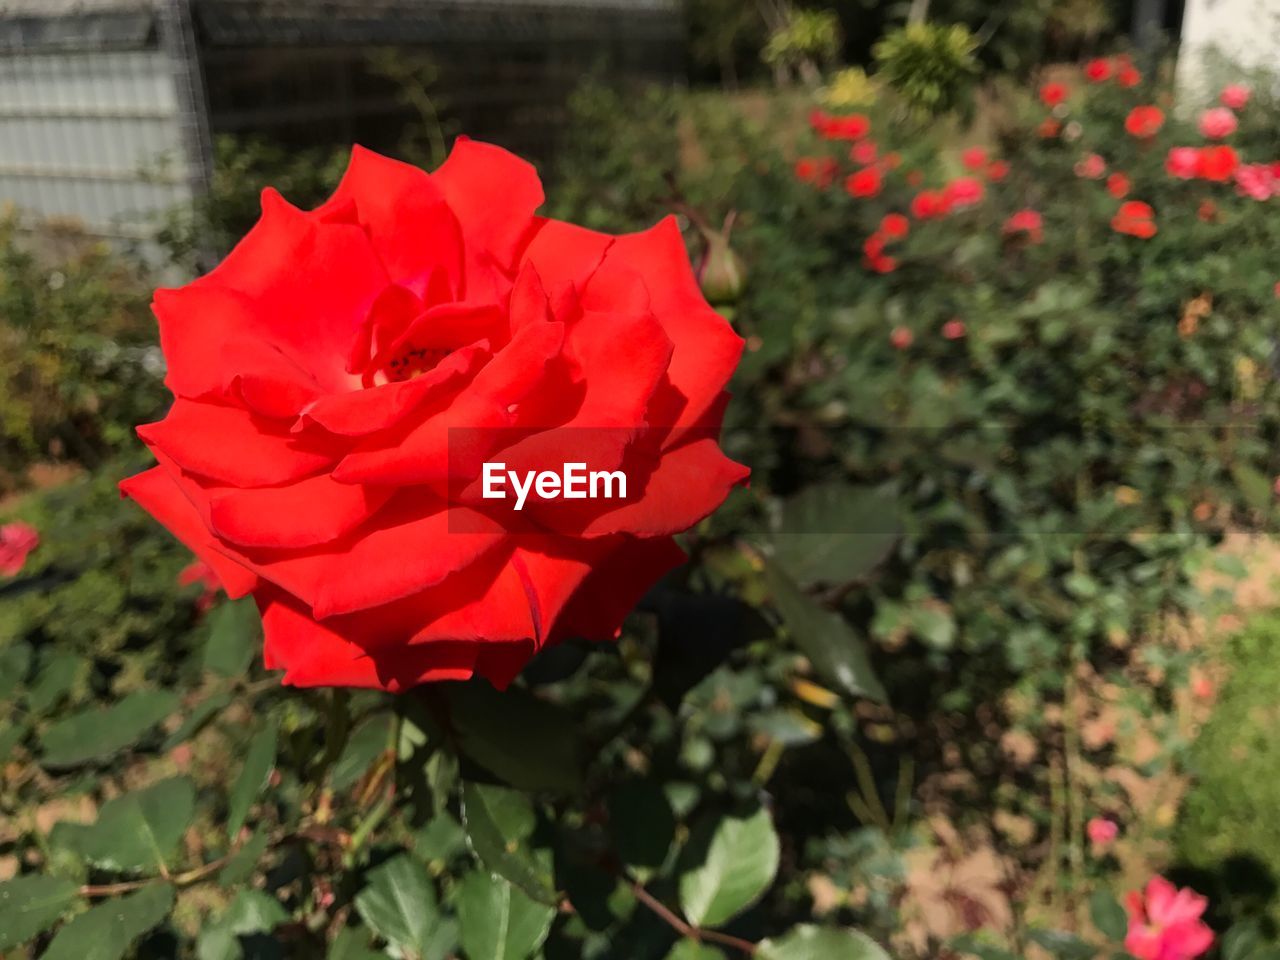 RED ROSE BLOOMING OUTDOORS